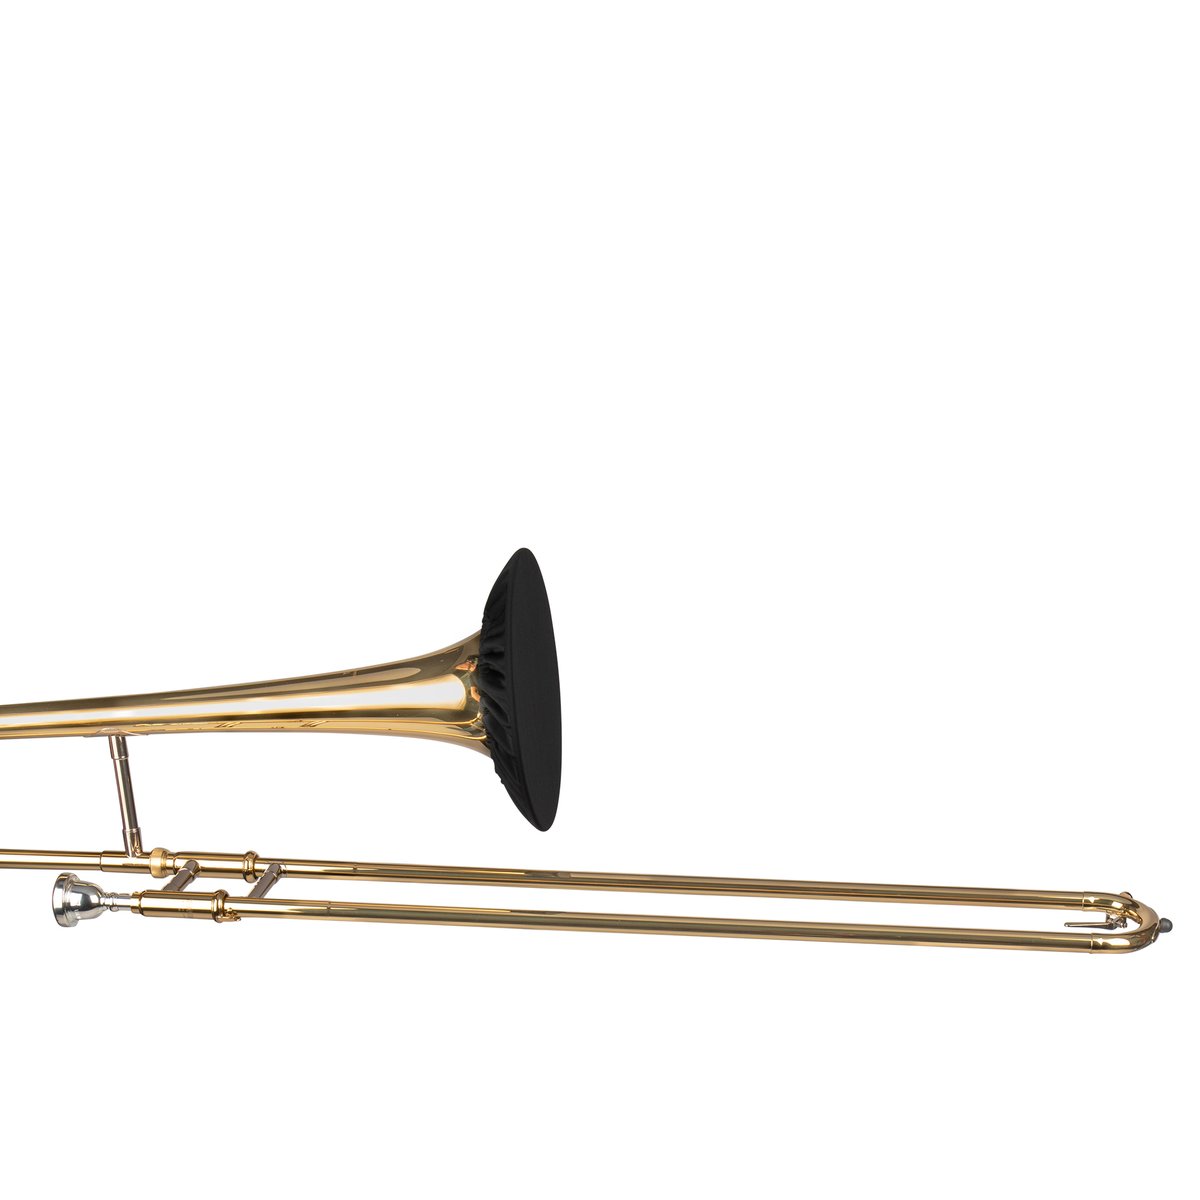 Double-Layer Wind Instrument Cover for Bell Sizes Ranging from 7 to 8.75-Inches (Black Color)